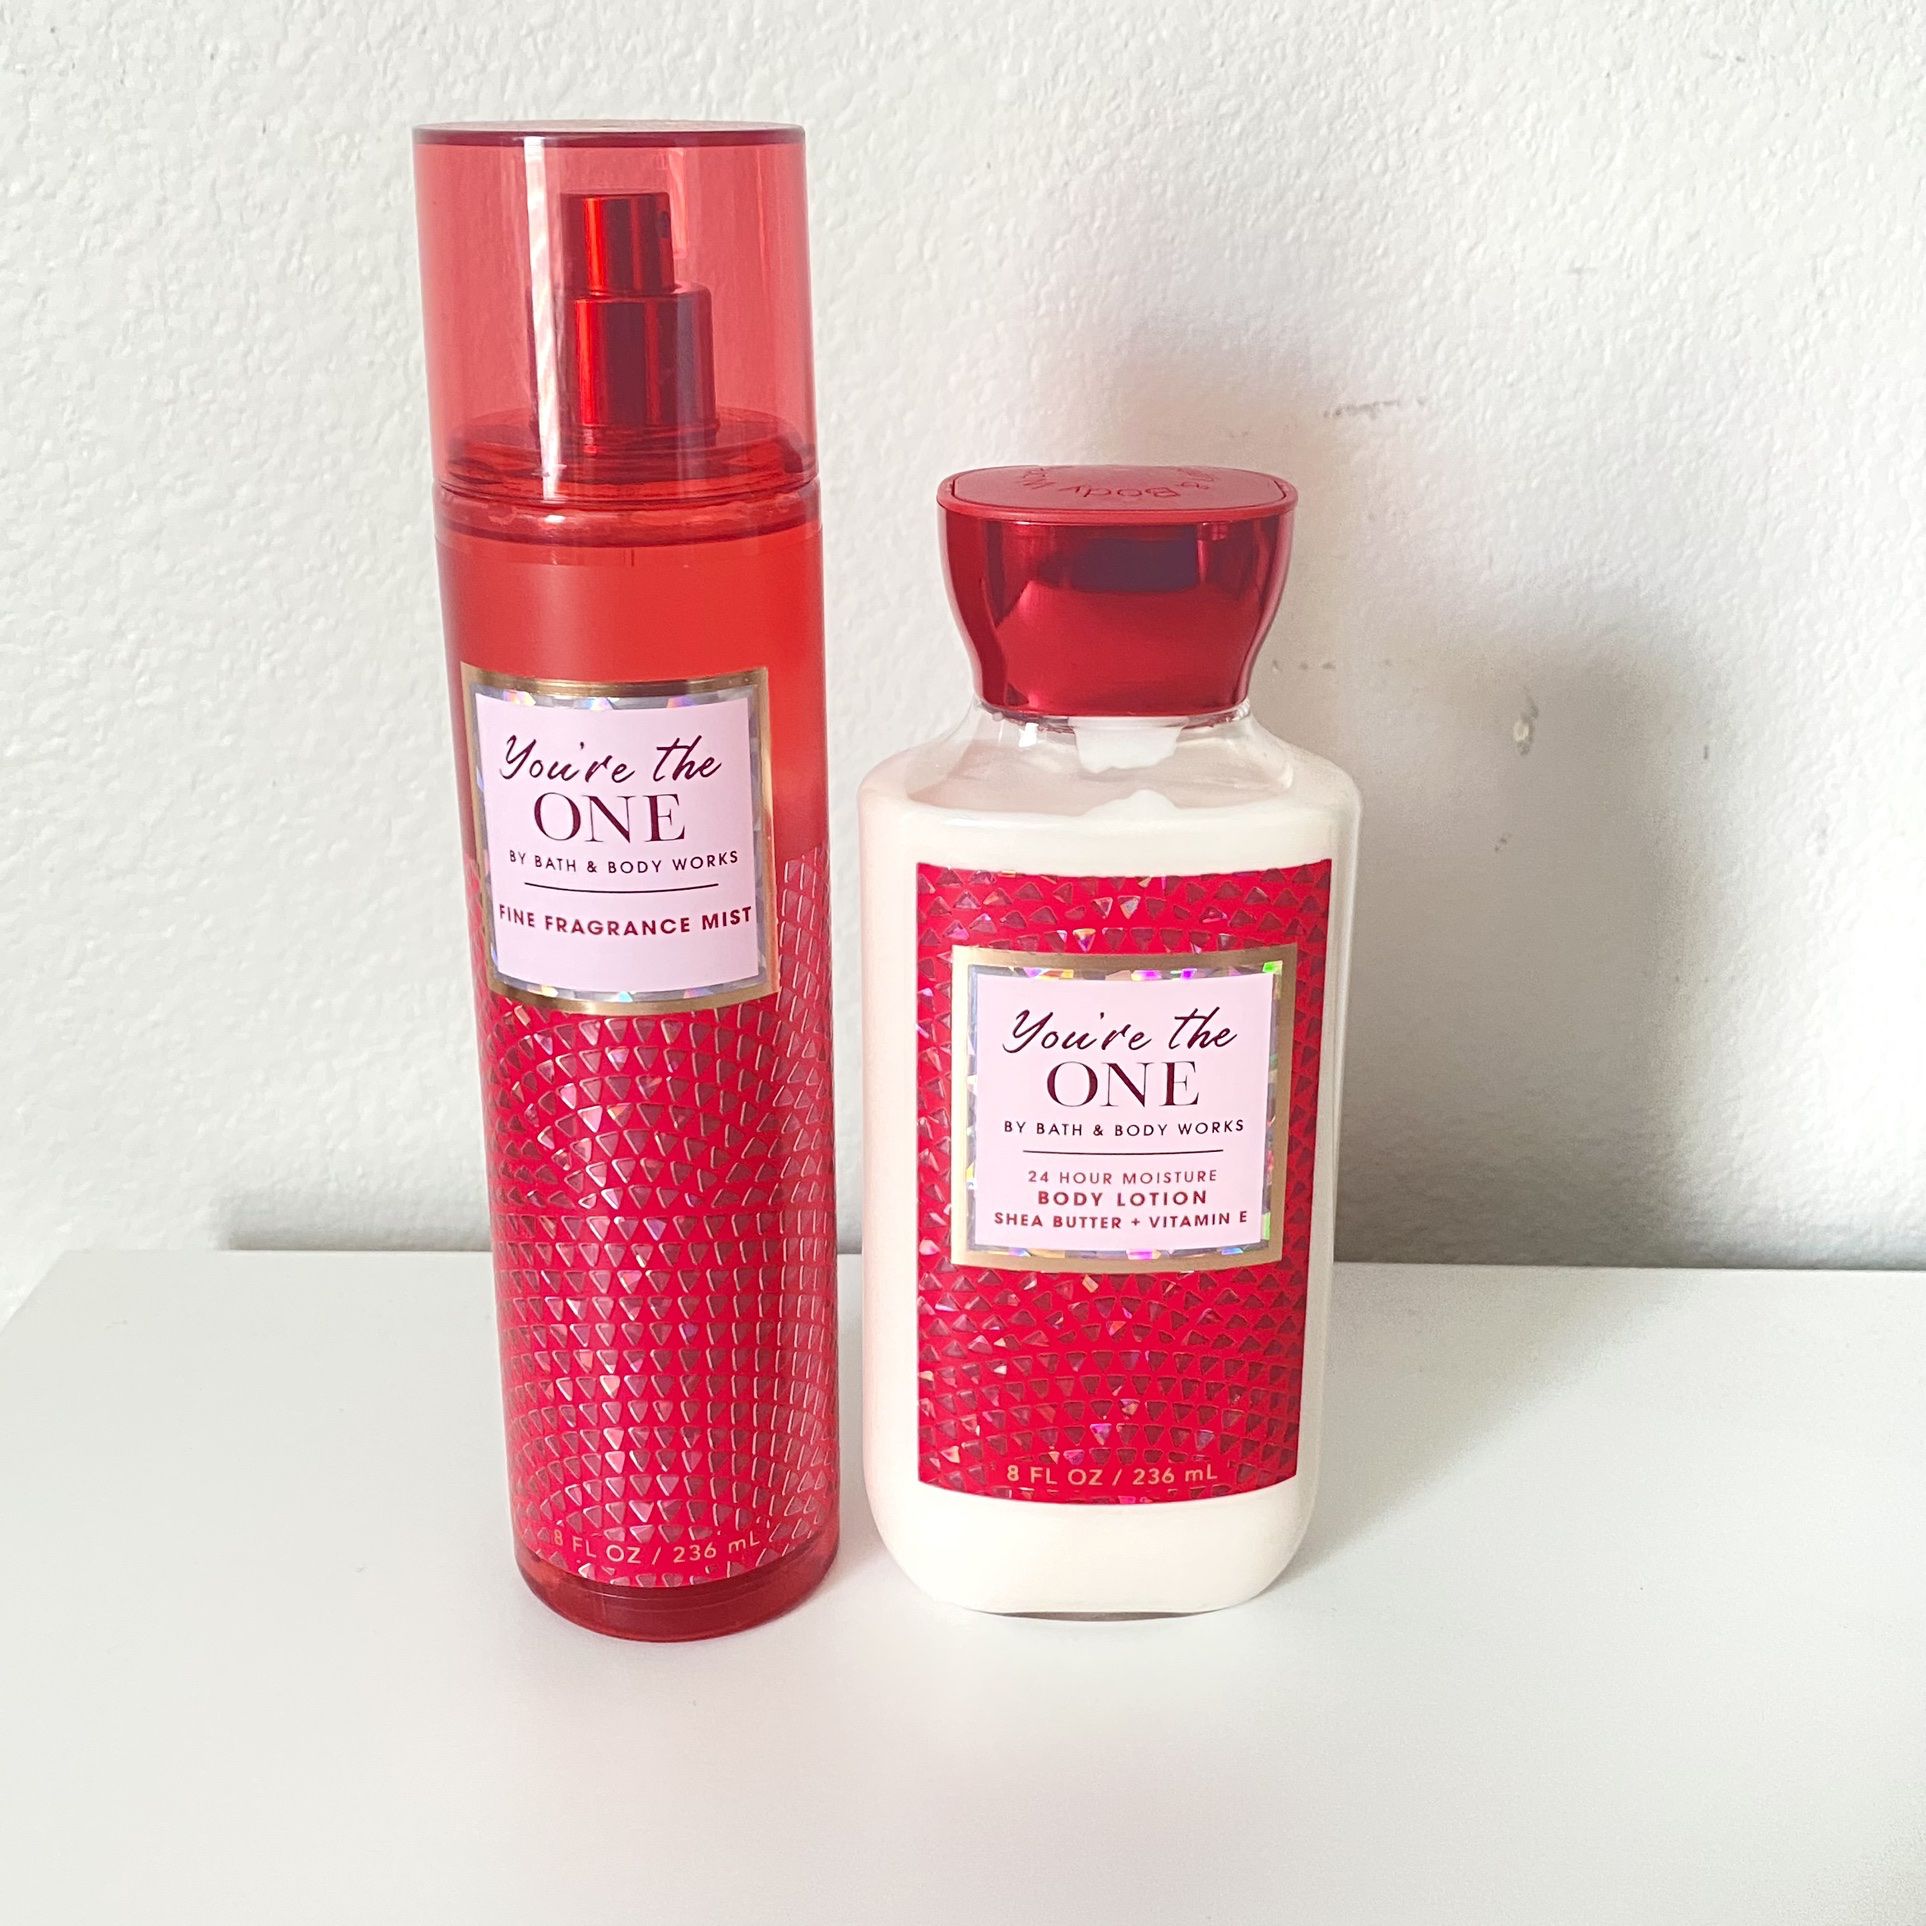 New! Bath and Body Works BBW “You’re The one” Body Lotion Fragrance Mist  for Sale in Quartz Hill, CA - OfferUp